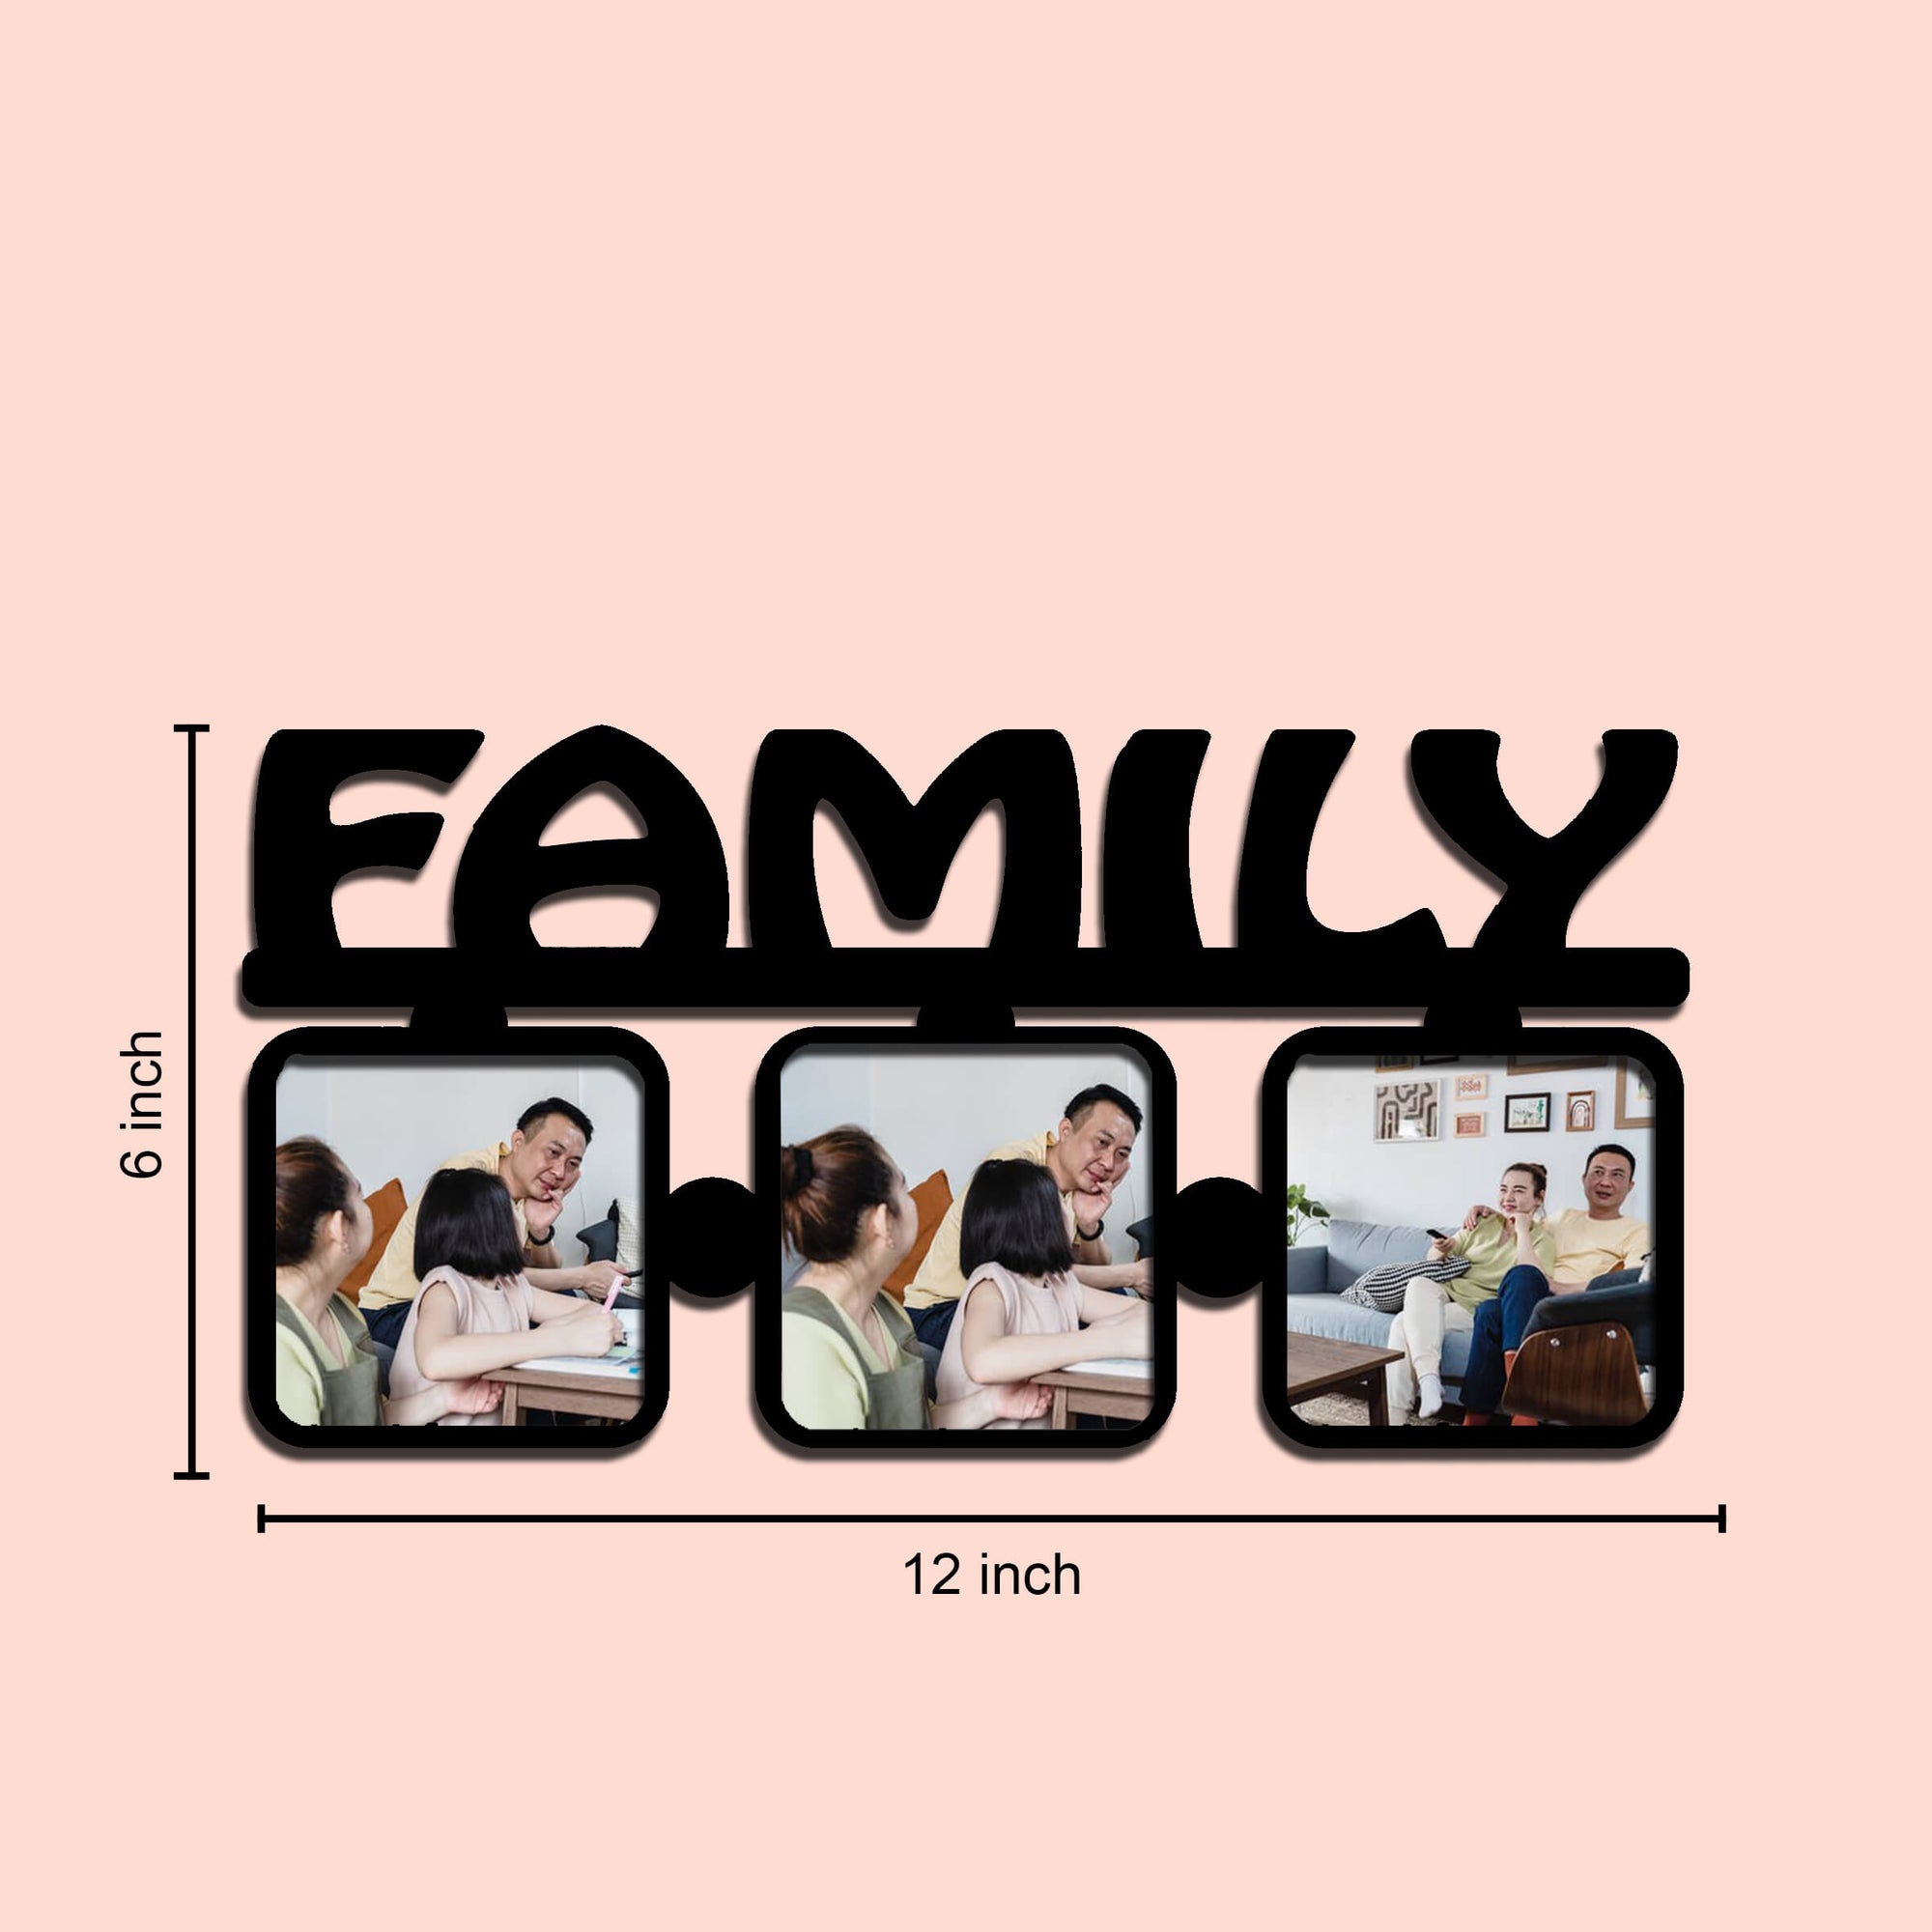 Laser Cut Photo Frame for Family Photos - 3 Photos, MDF Wood, 12x6 Inches